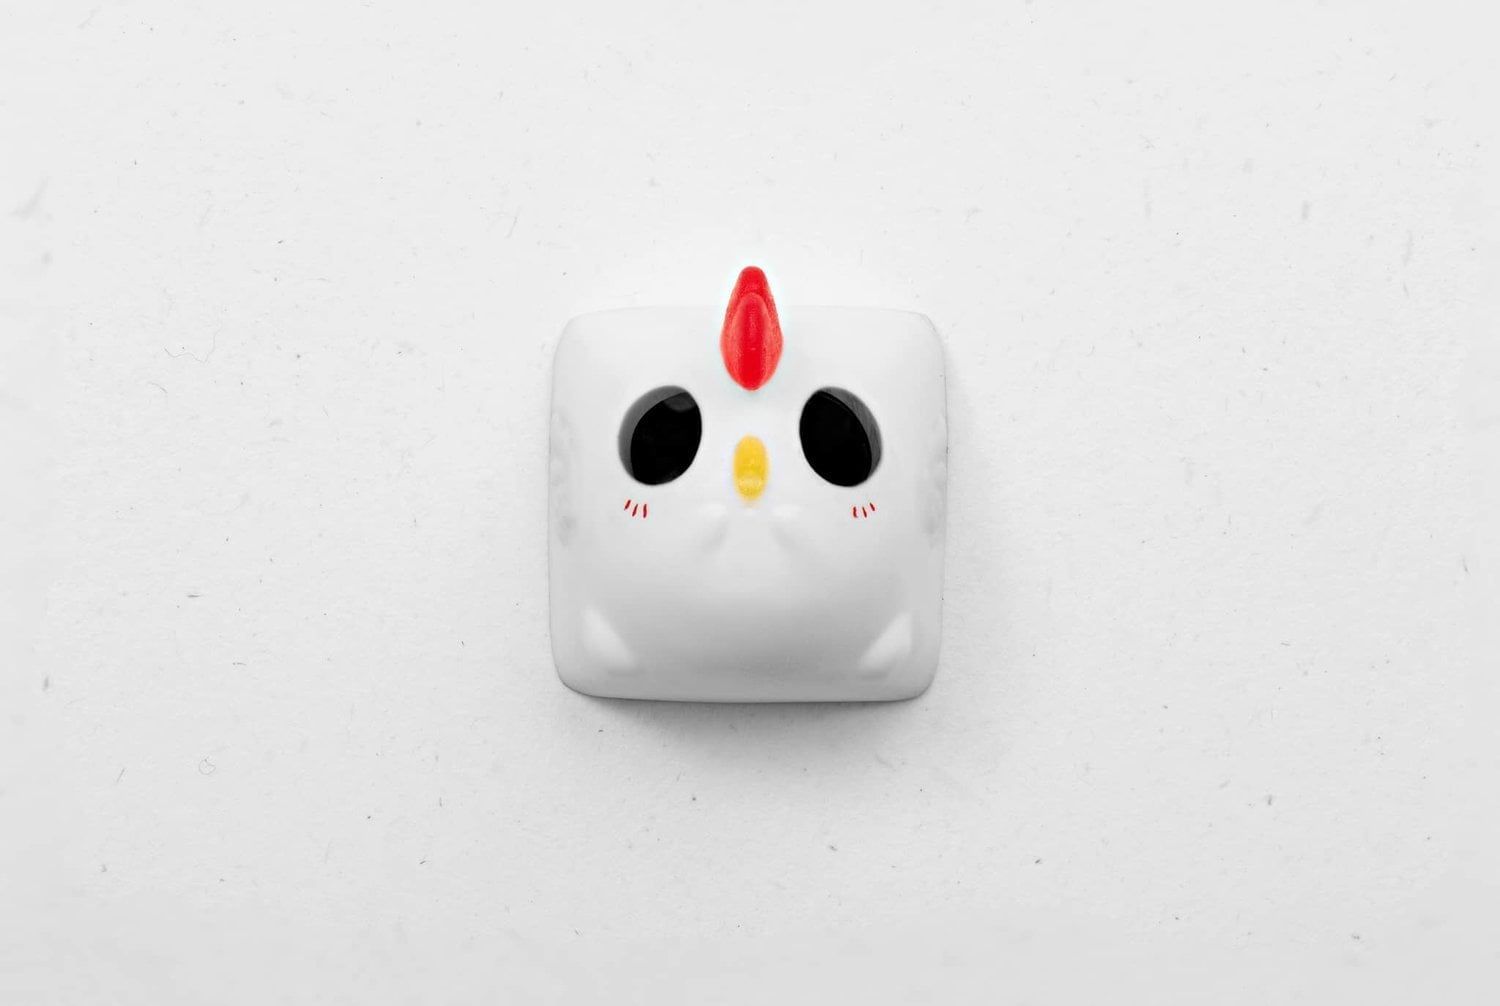 rooster keycap